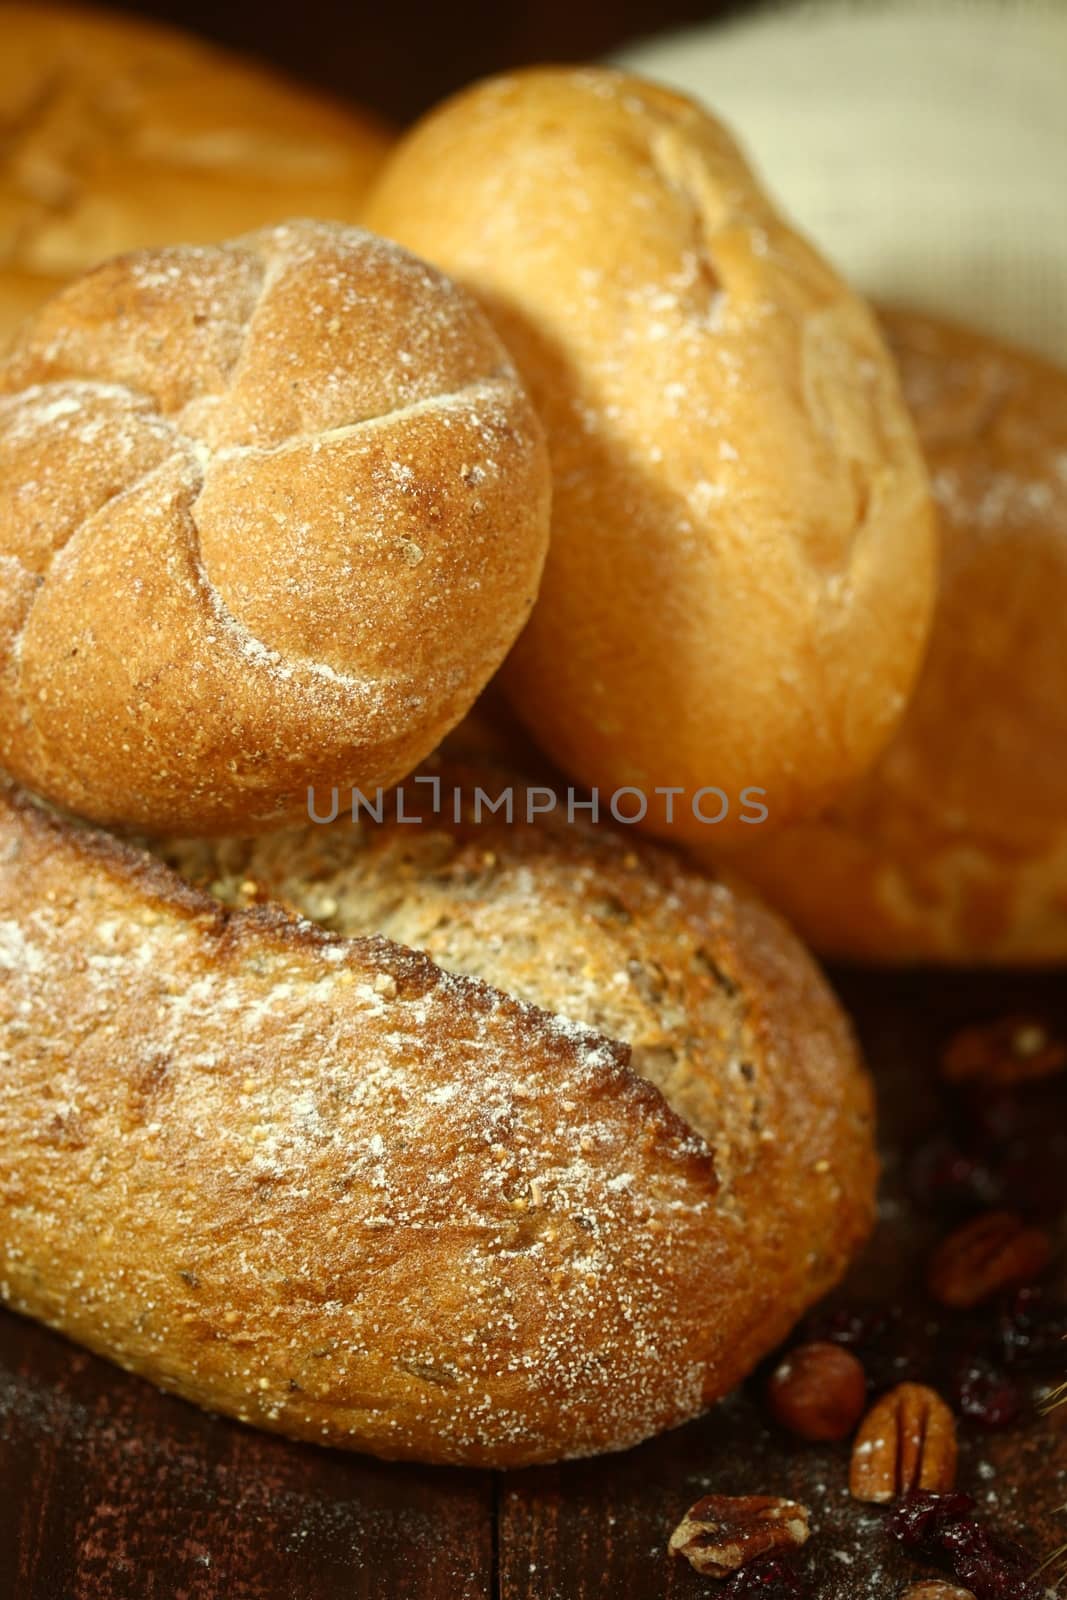 Fresh Baked Bread on Wooden Background